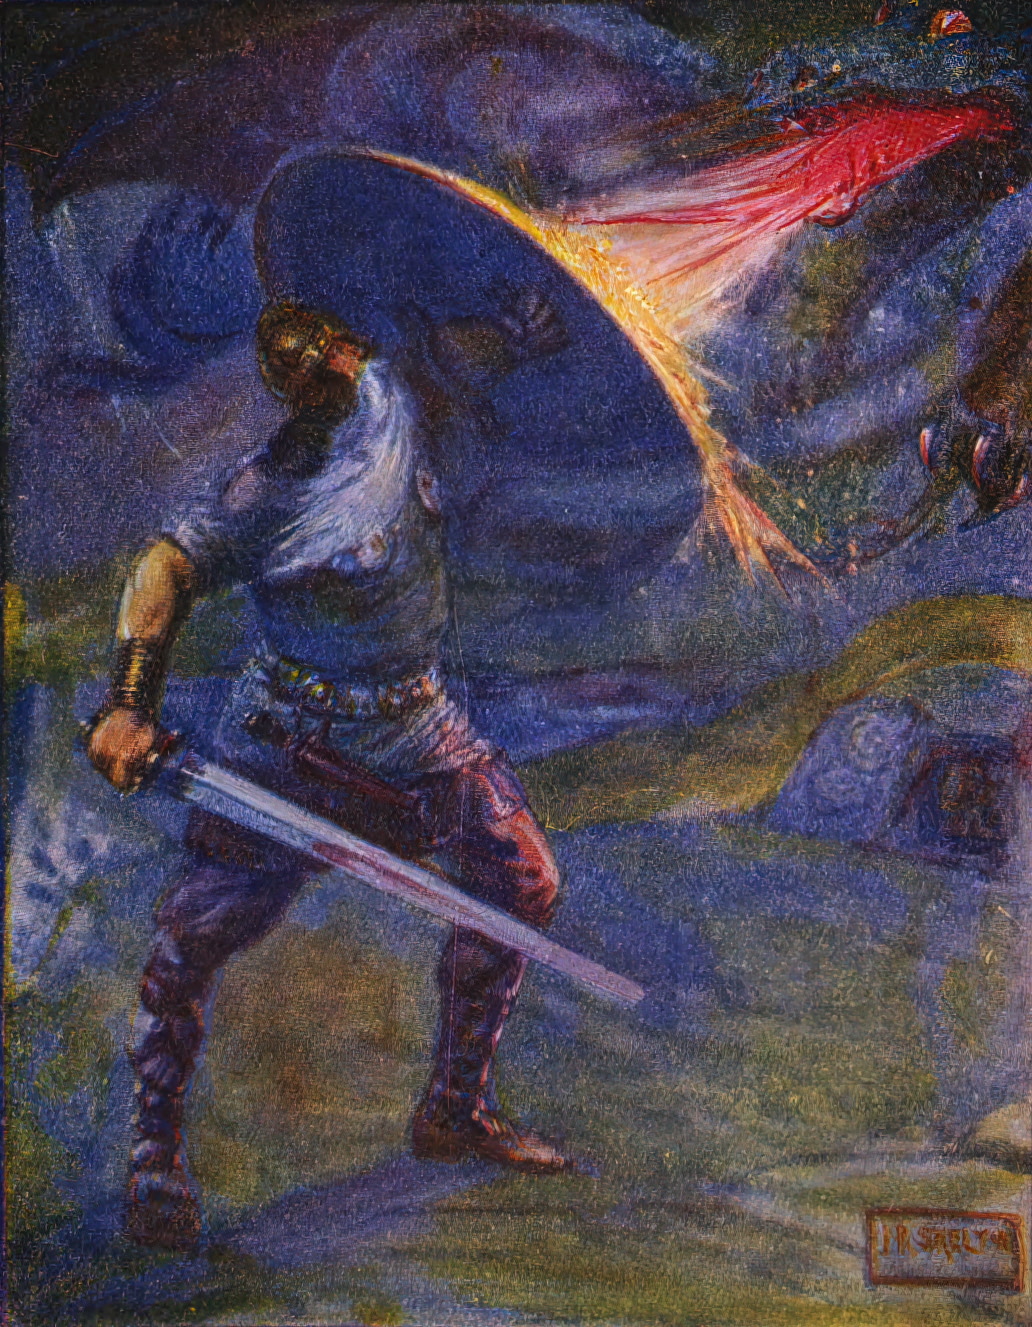 Beowulf raises his shield to protect himself from the fiery breath of the dragon.